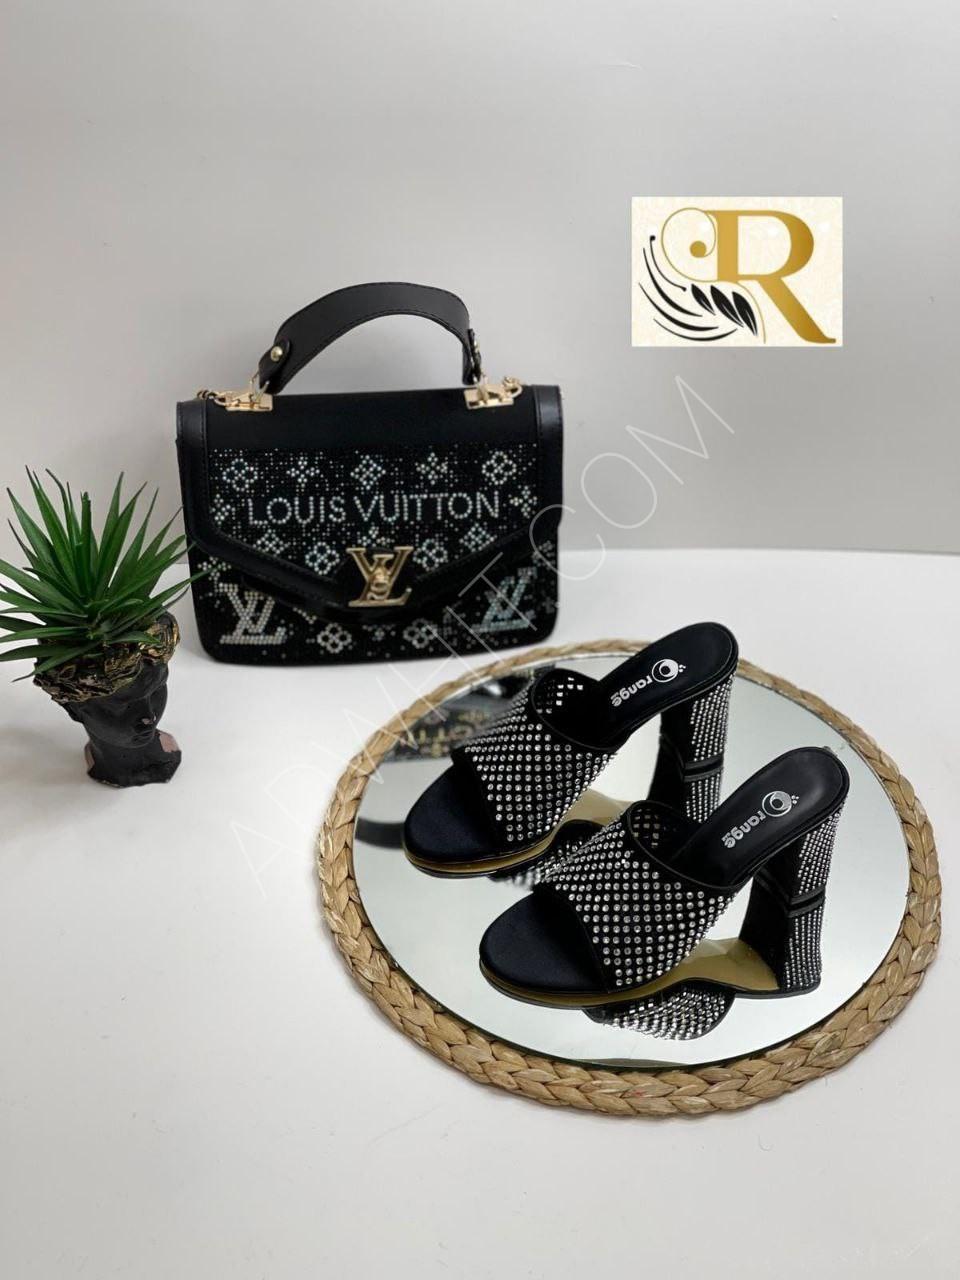 sneakers louis vuitton bag and shoes set